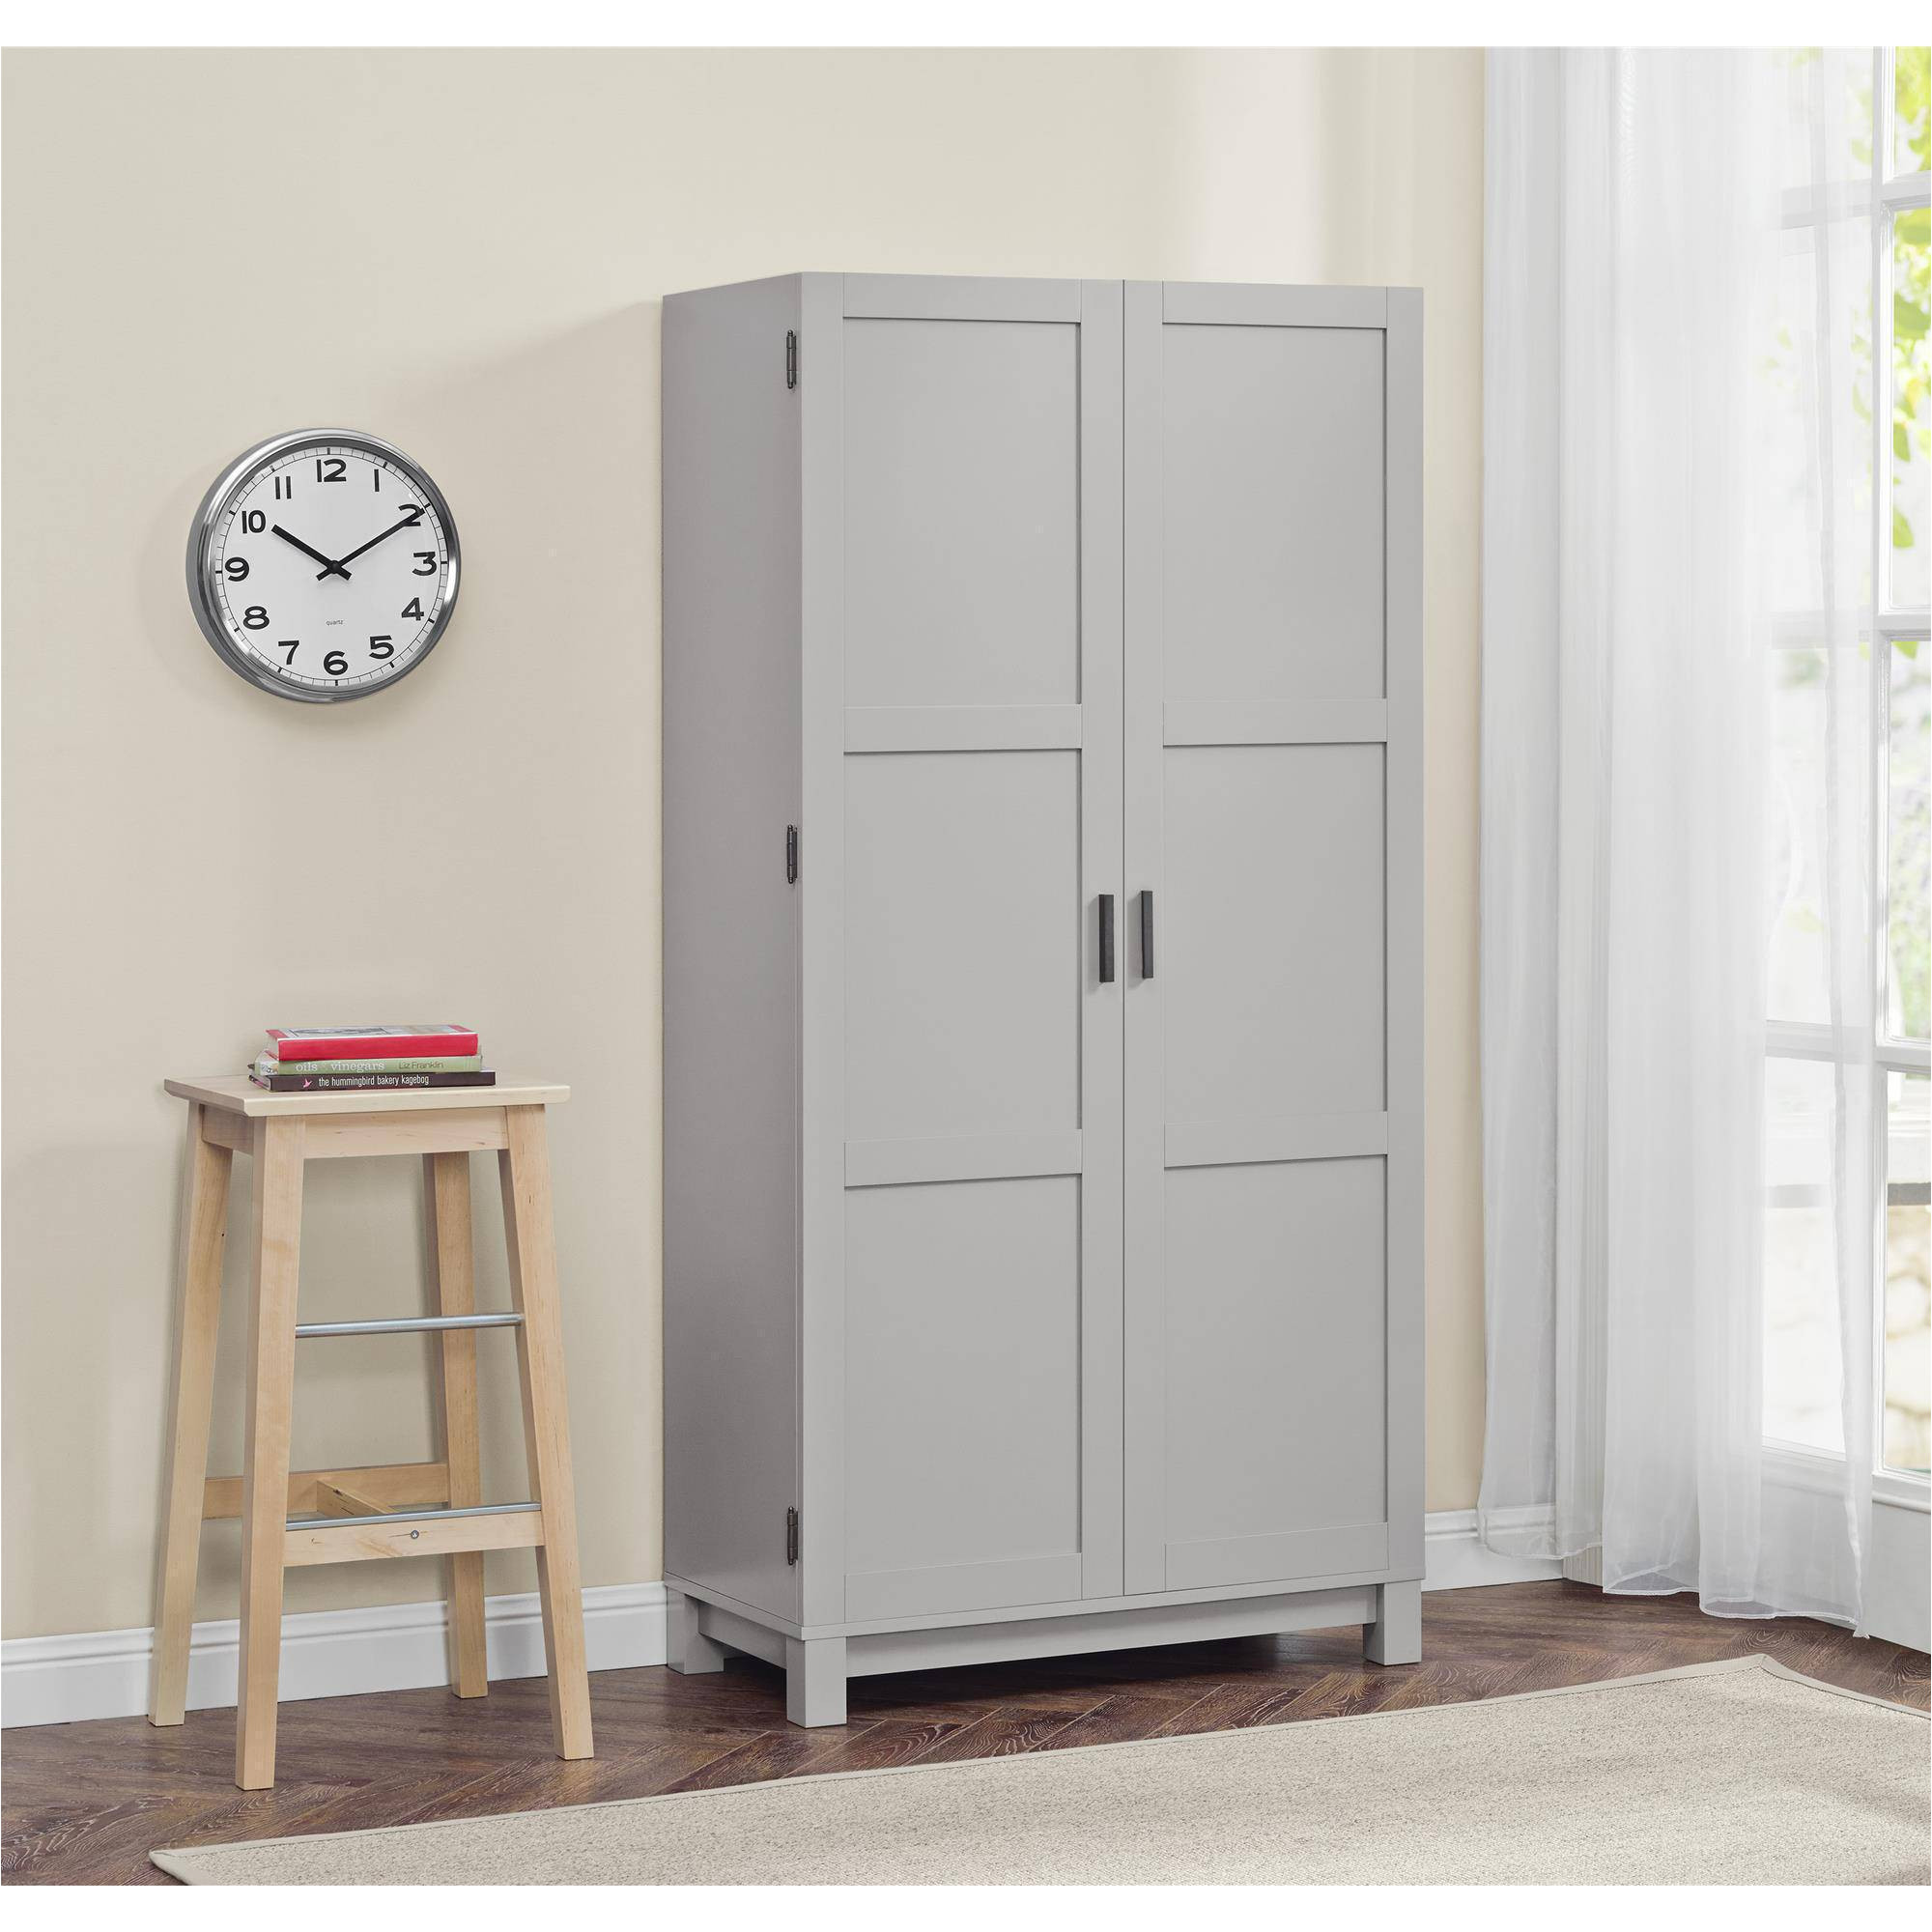 better homes and gardens langley bay storage cabinet multiple colors walmart com